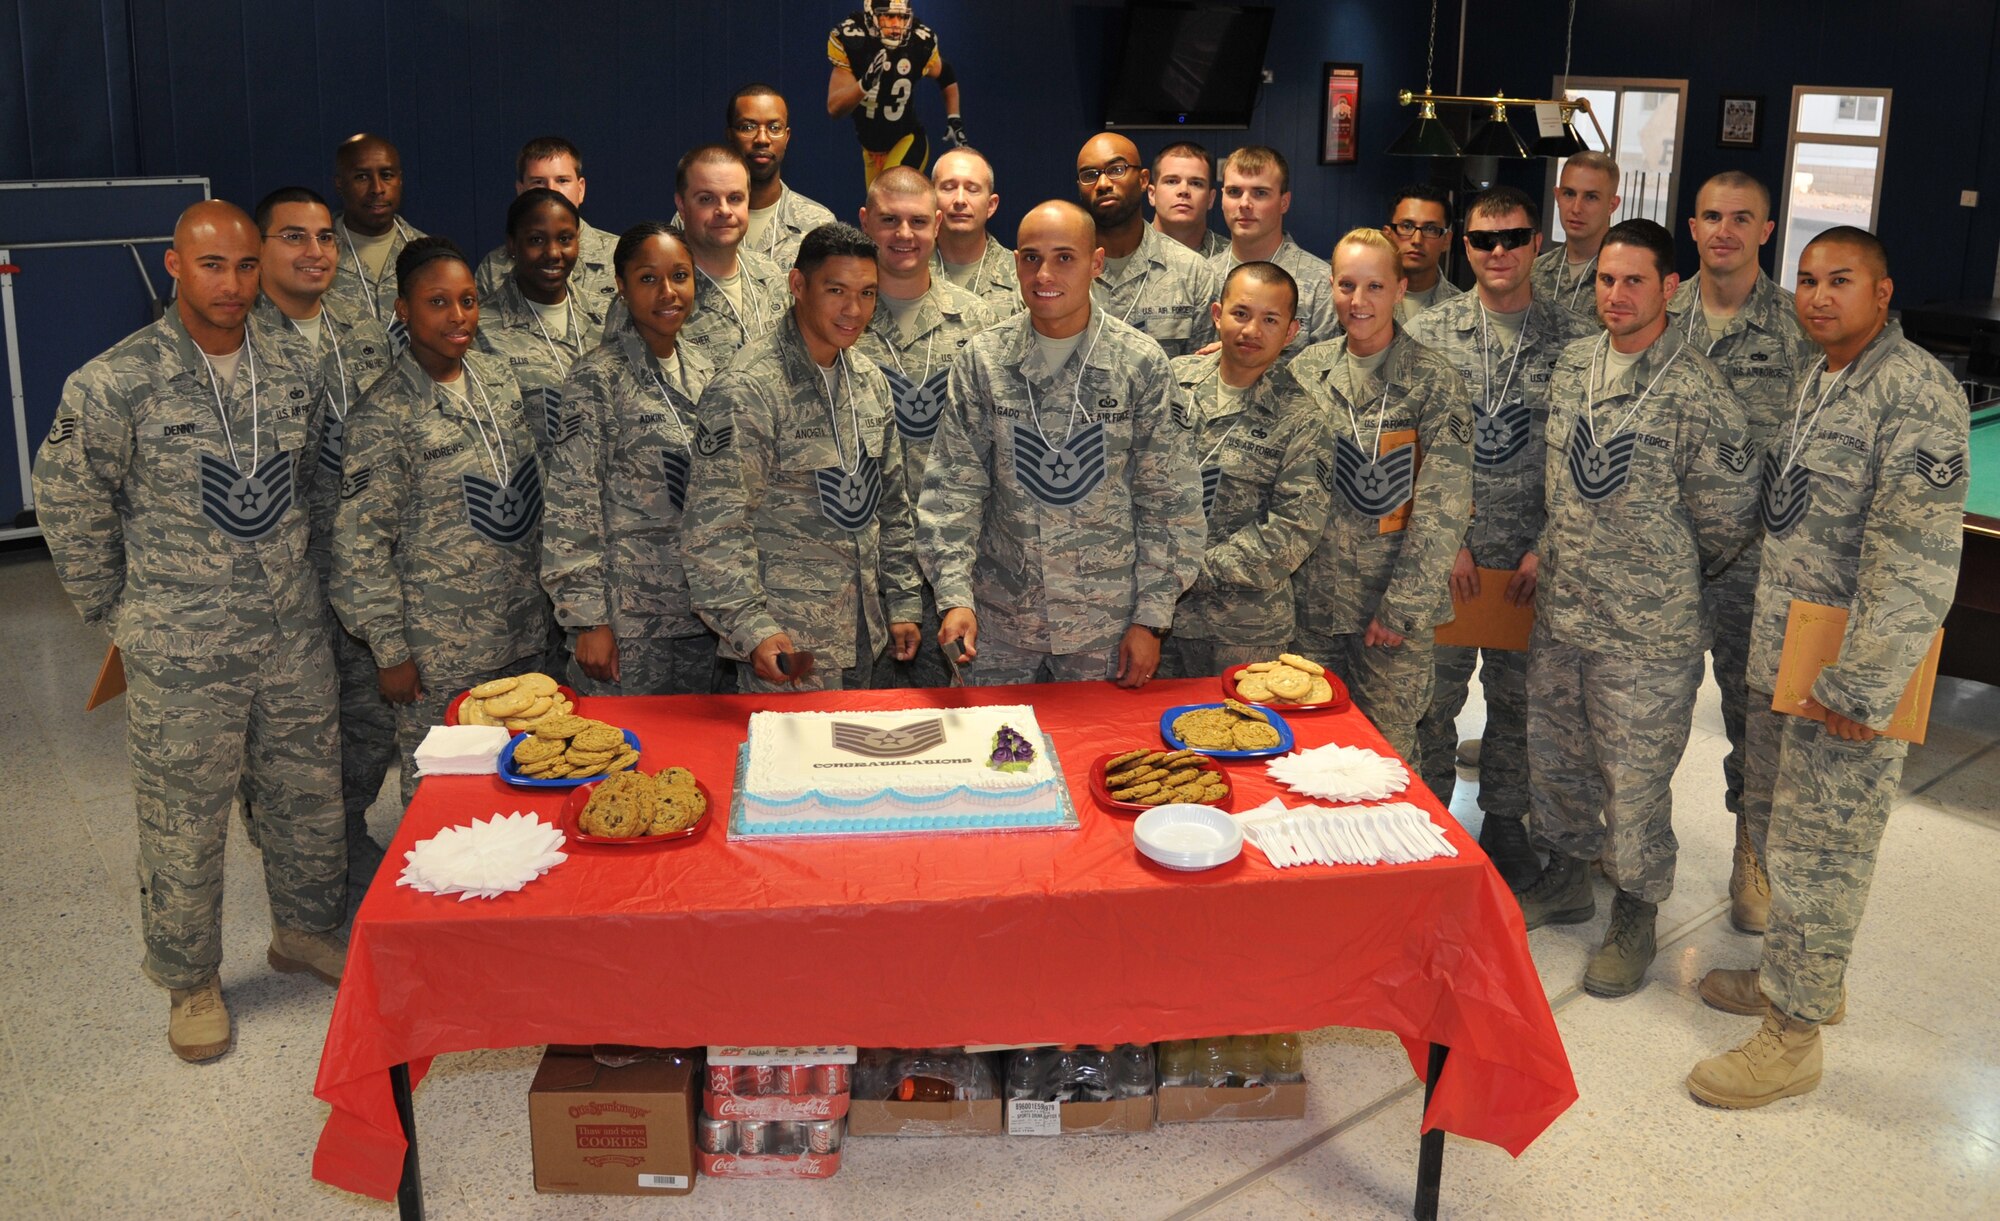 Technical Sergeant selects celebrate their upcoming promotion June 24 at an undisclosed location in Southwest Asia. (U.S. Air Force photo by Carlotta Holley)